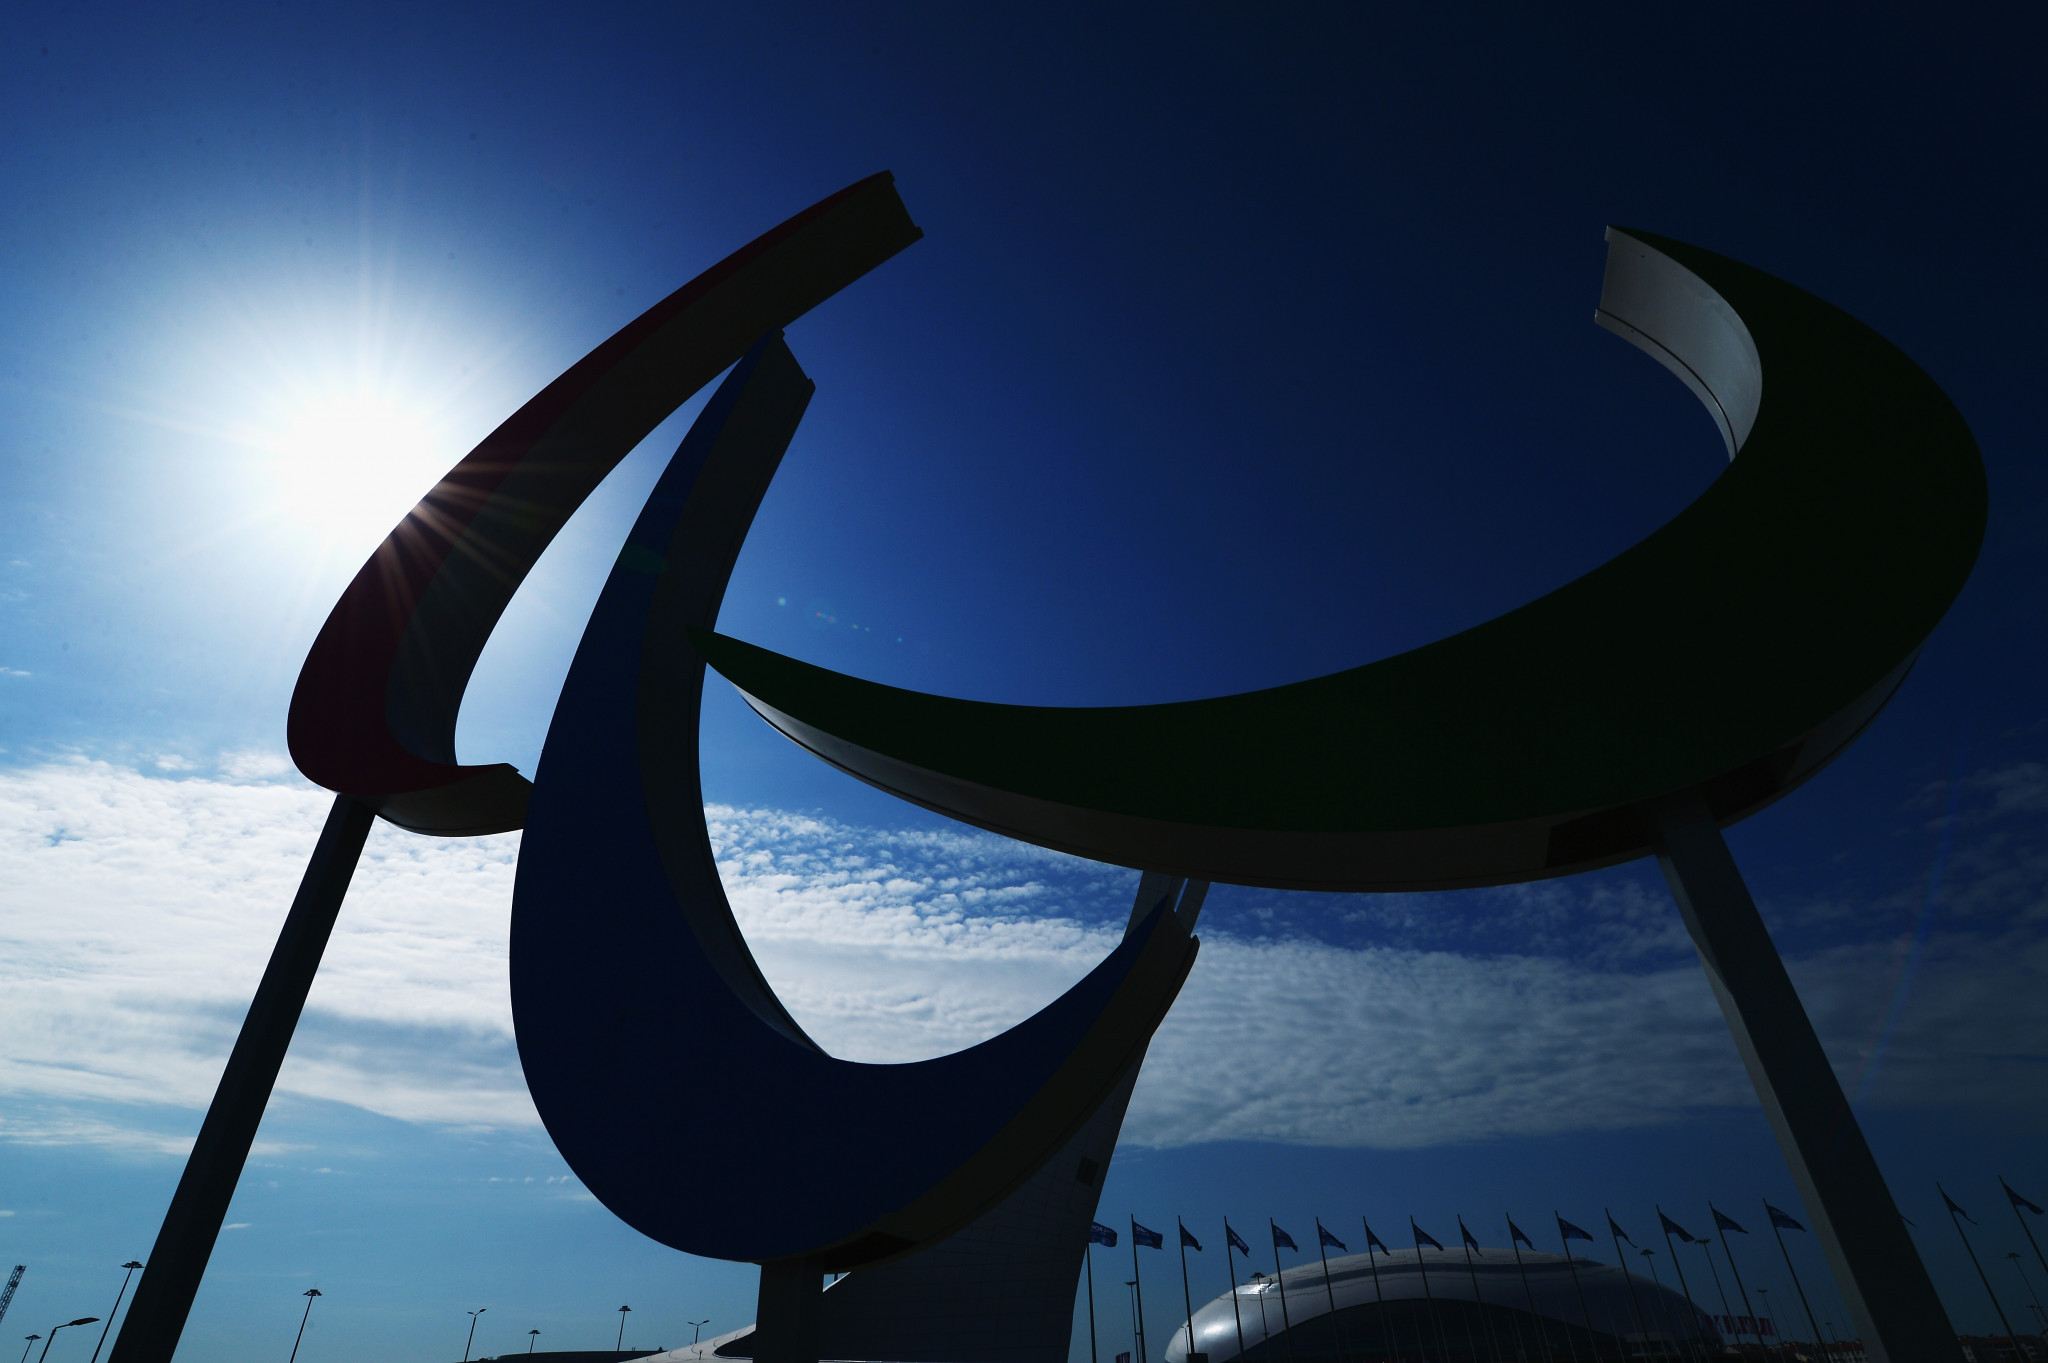 Tokyo 2020 on the agenda as IPC Governing Board to meet virtually over four days